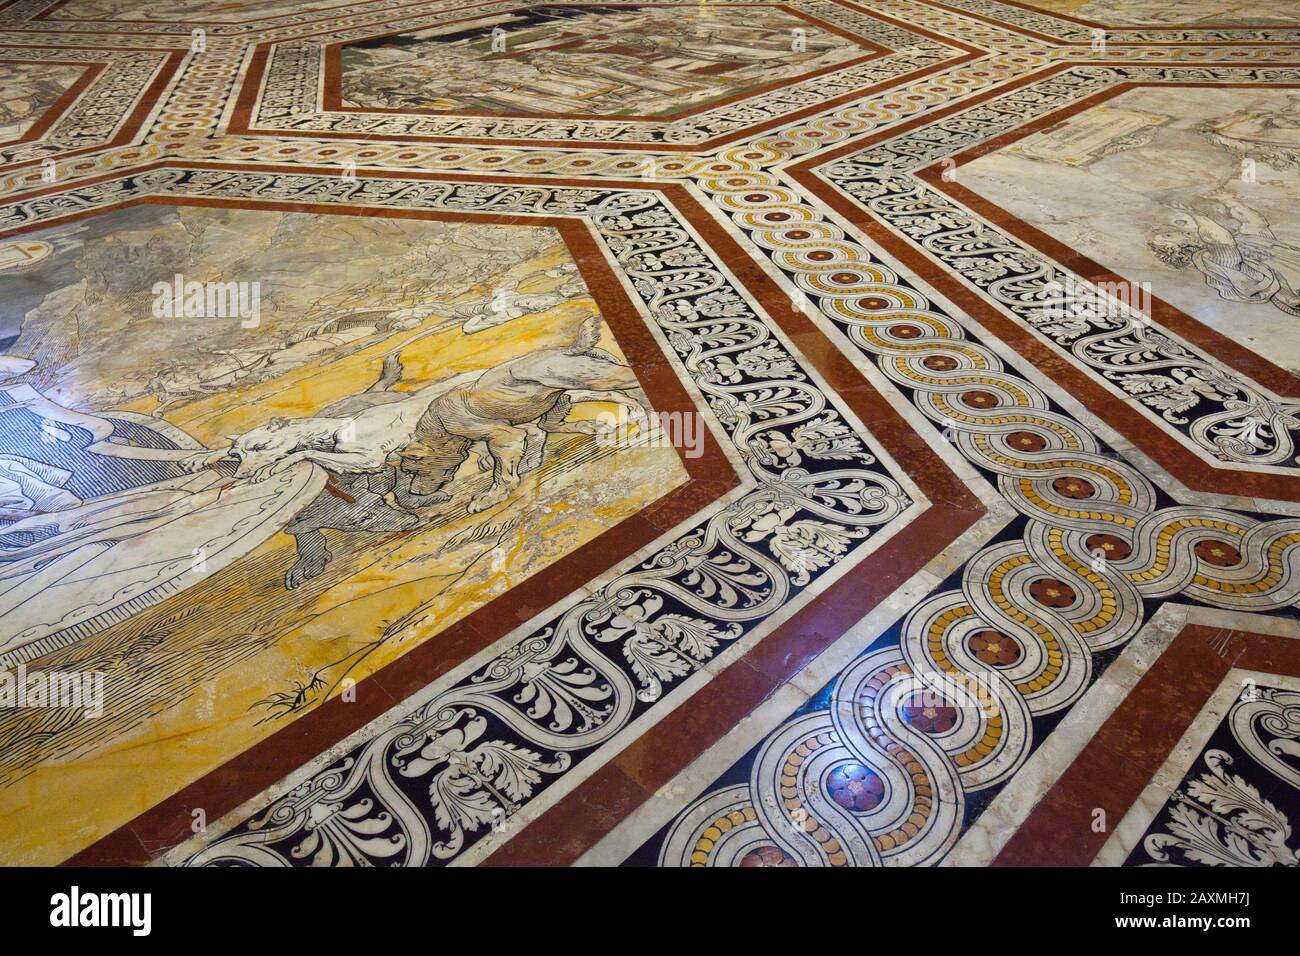 Mosaic Floor In The Cathedral Of Siena Tuscany Stock Photo